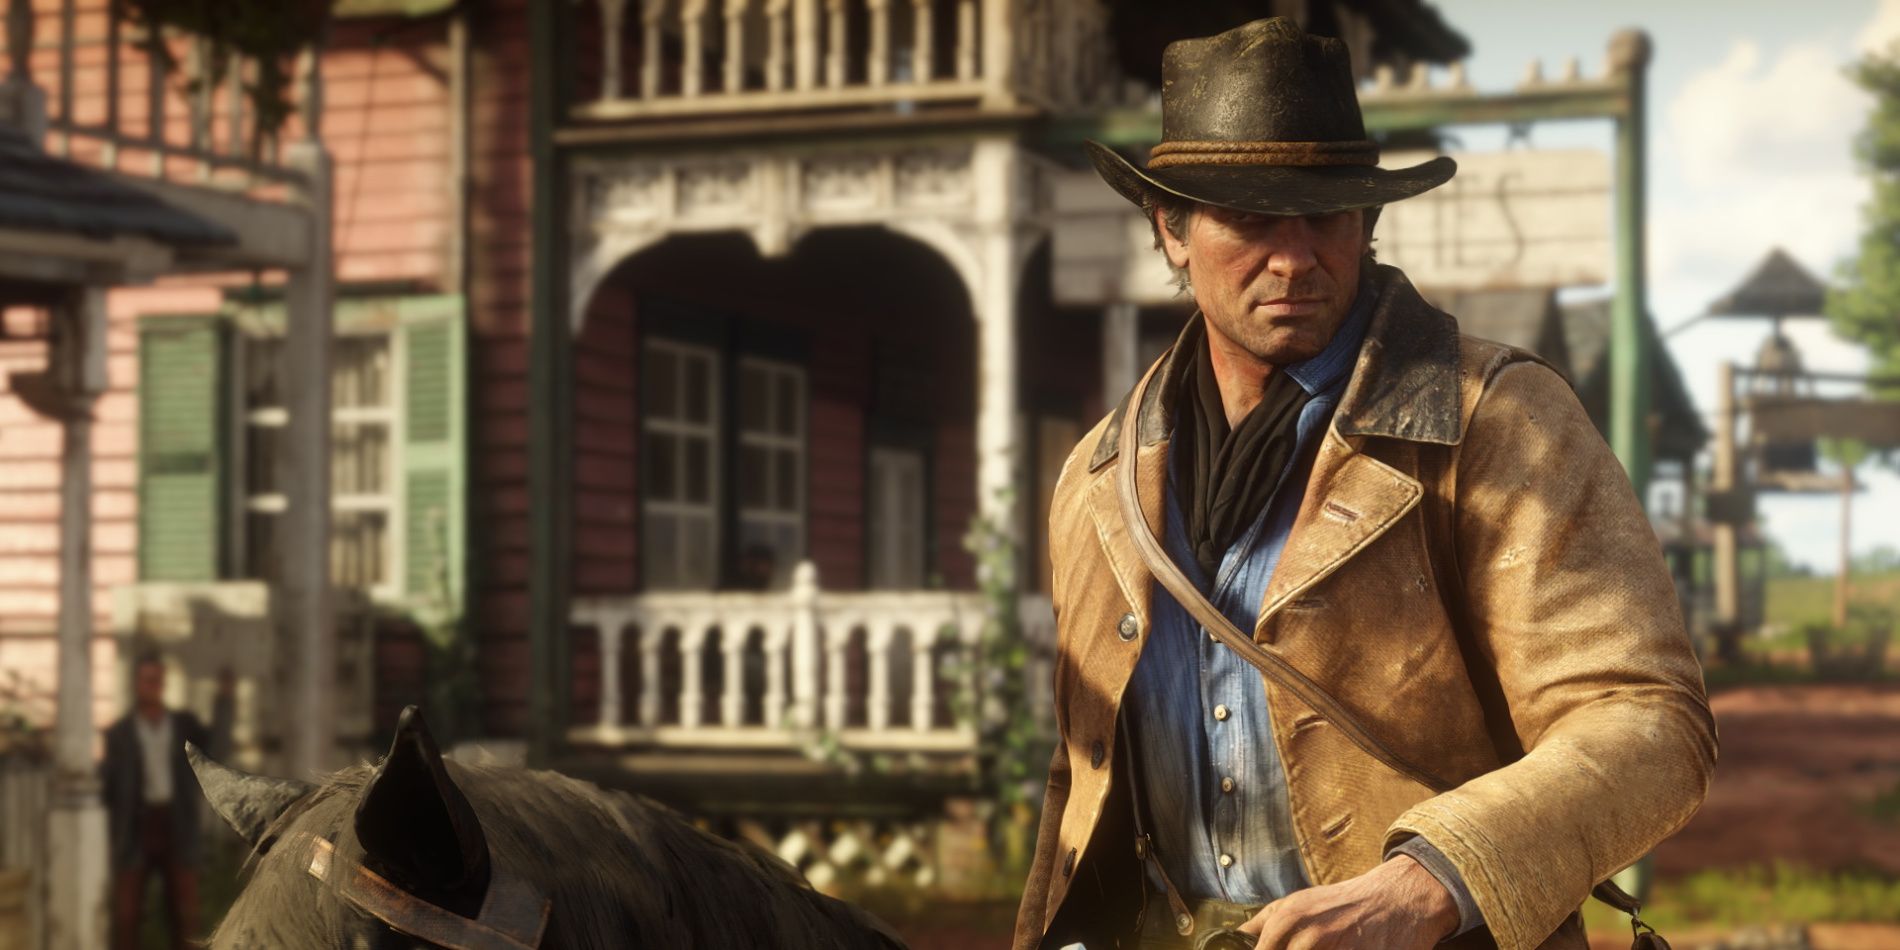 Report: Red Dead Redemption 2 remaster on PS5, Xbox Series X cancelled